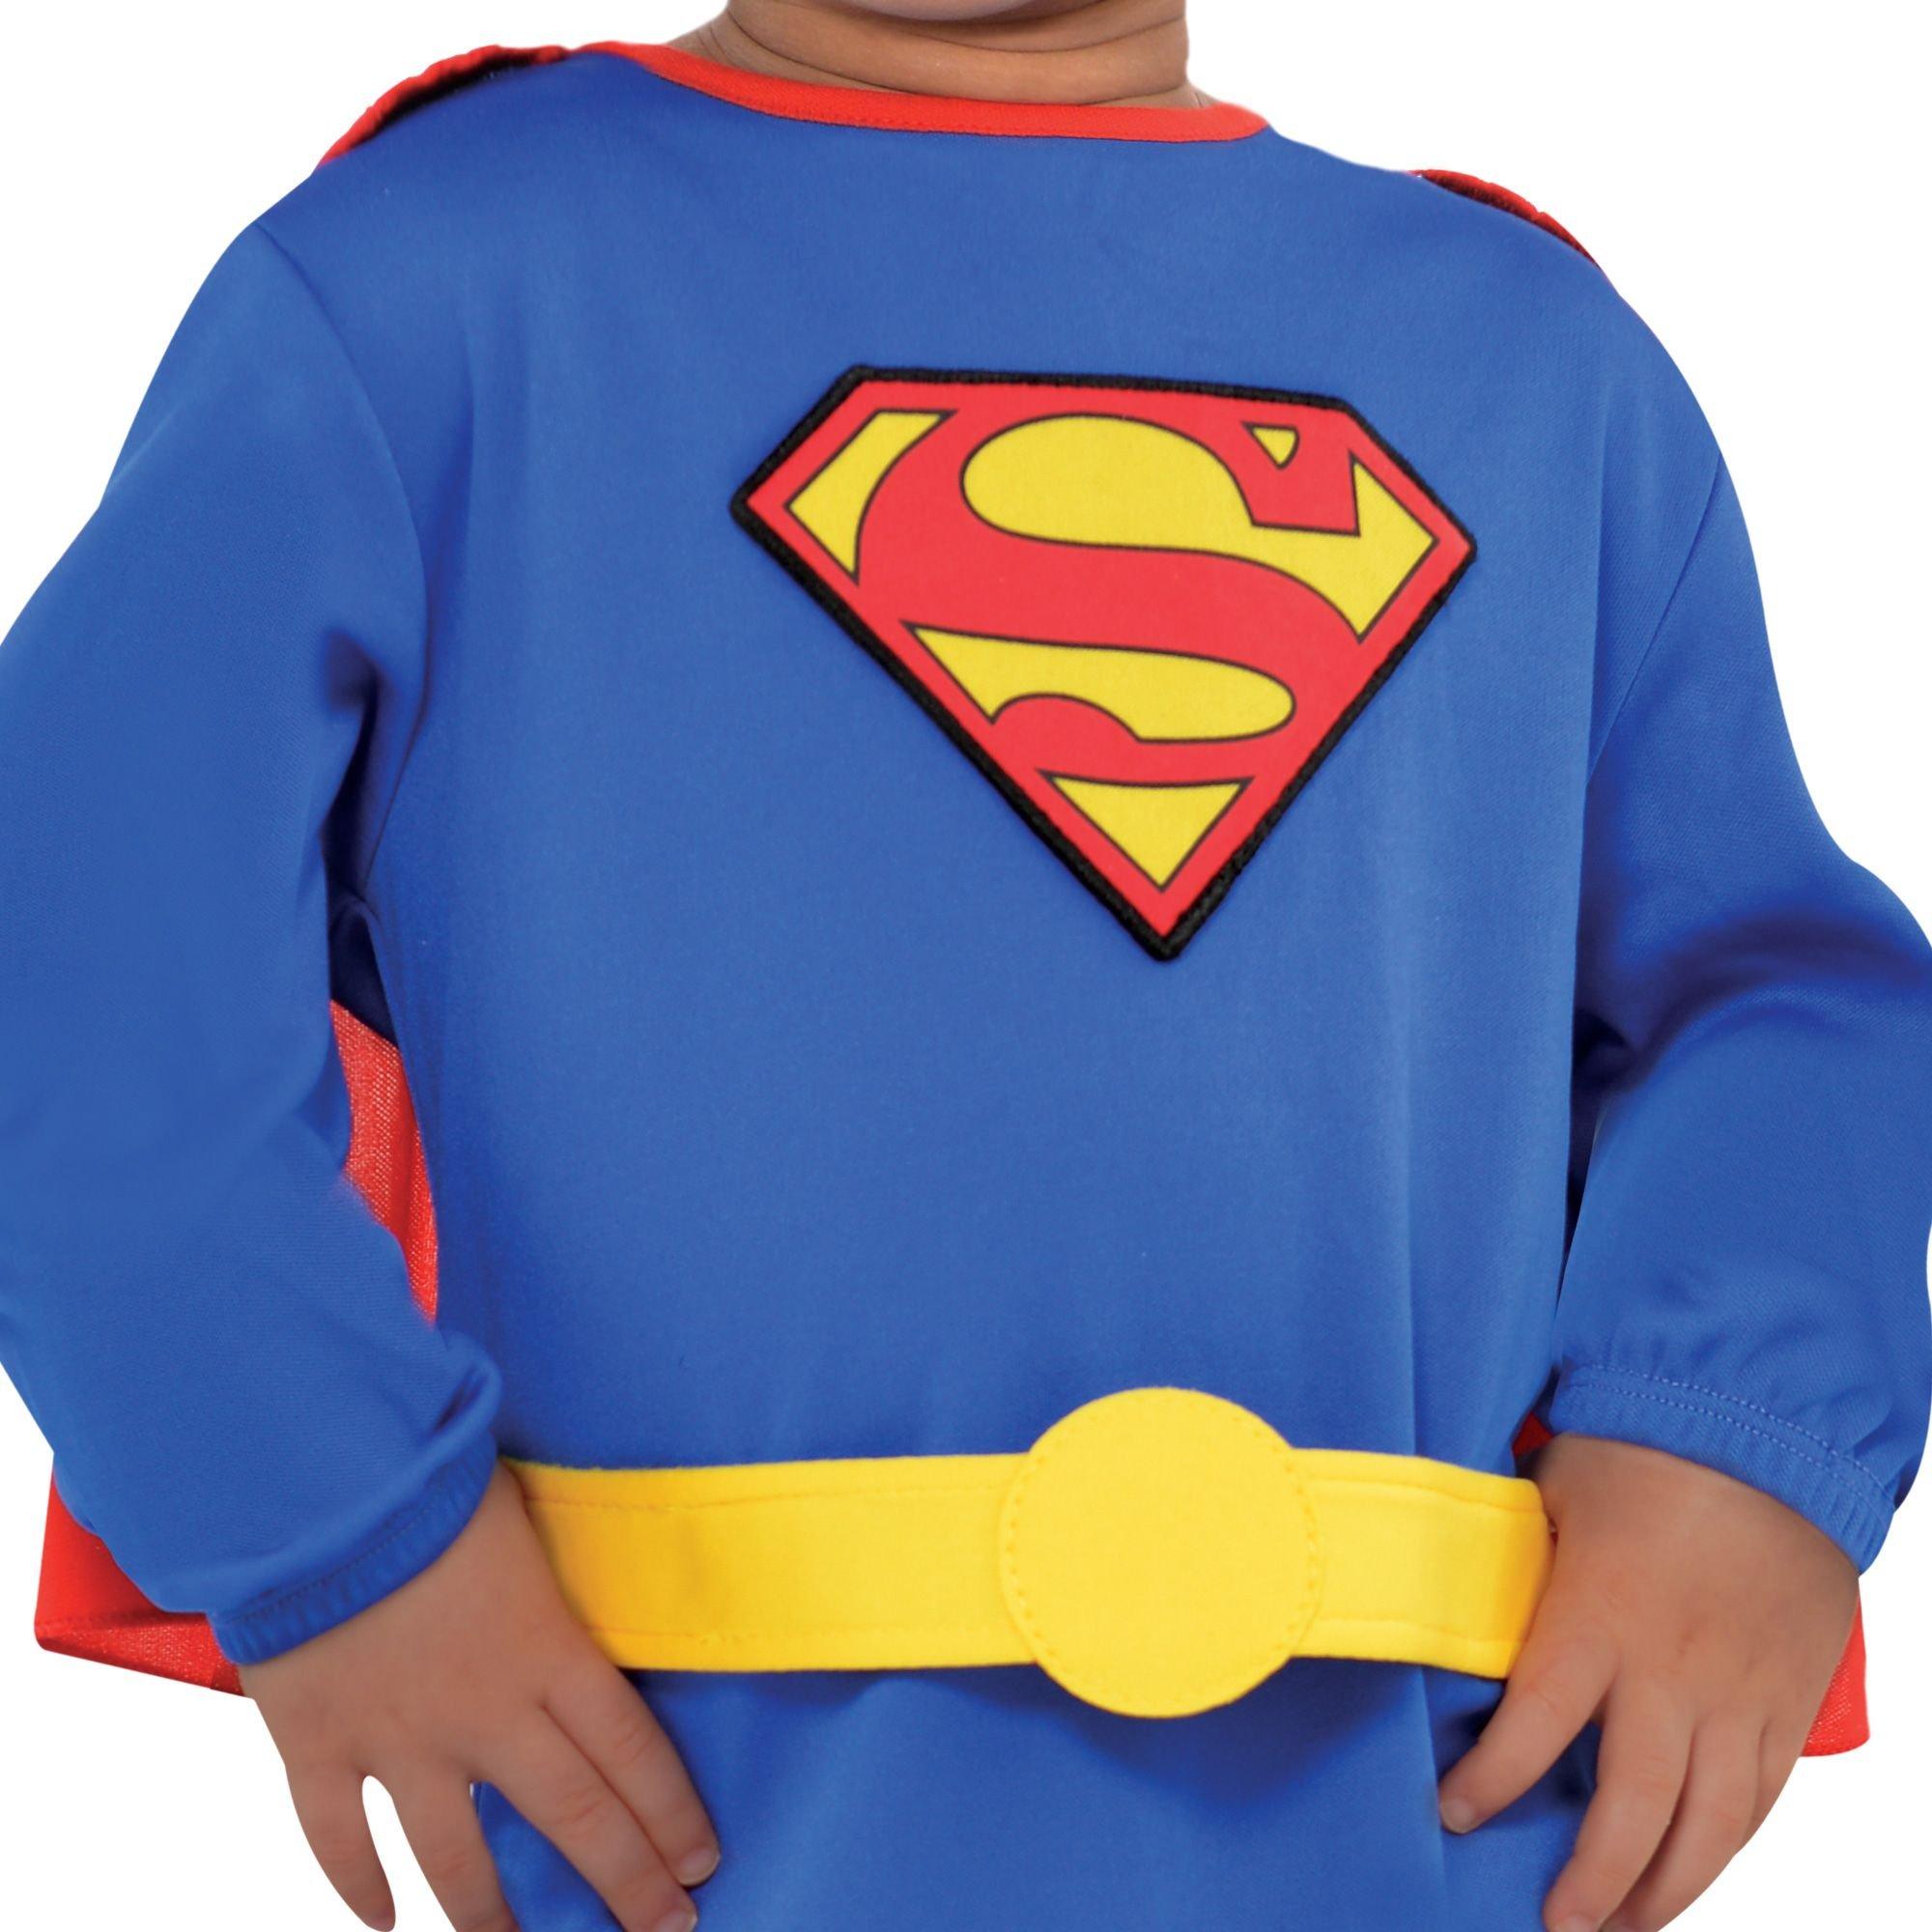 Classic Superman Costume For Toddlers